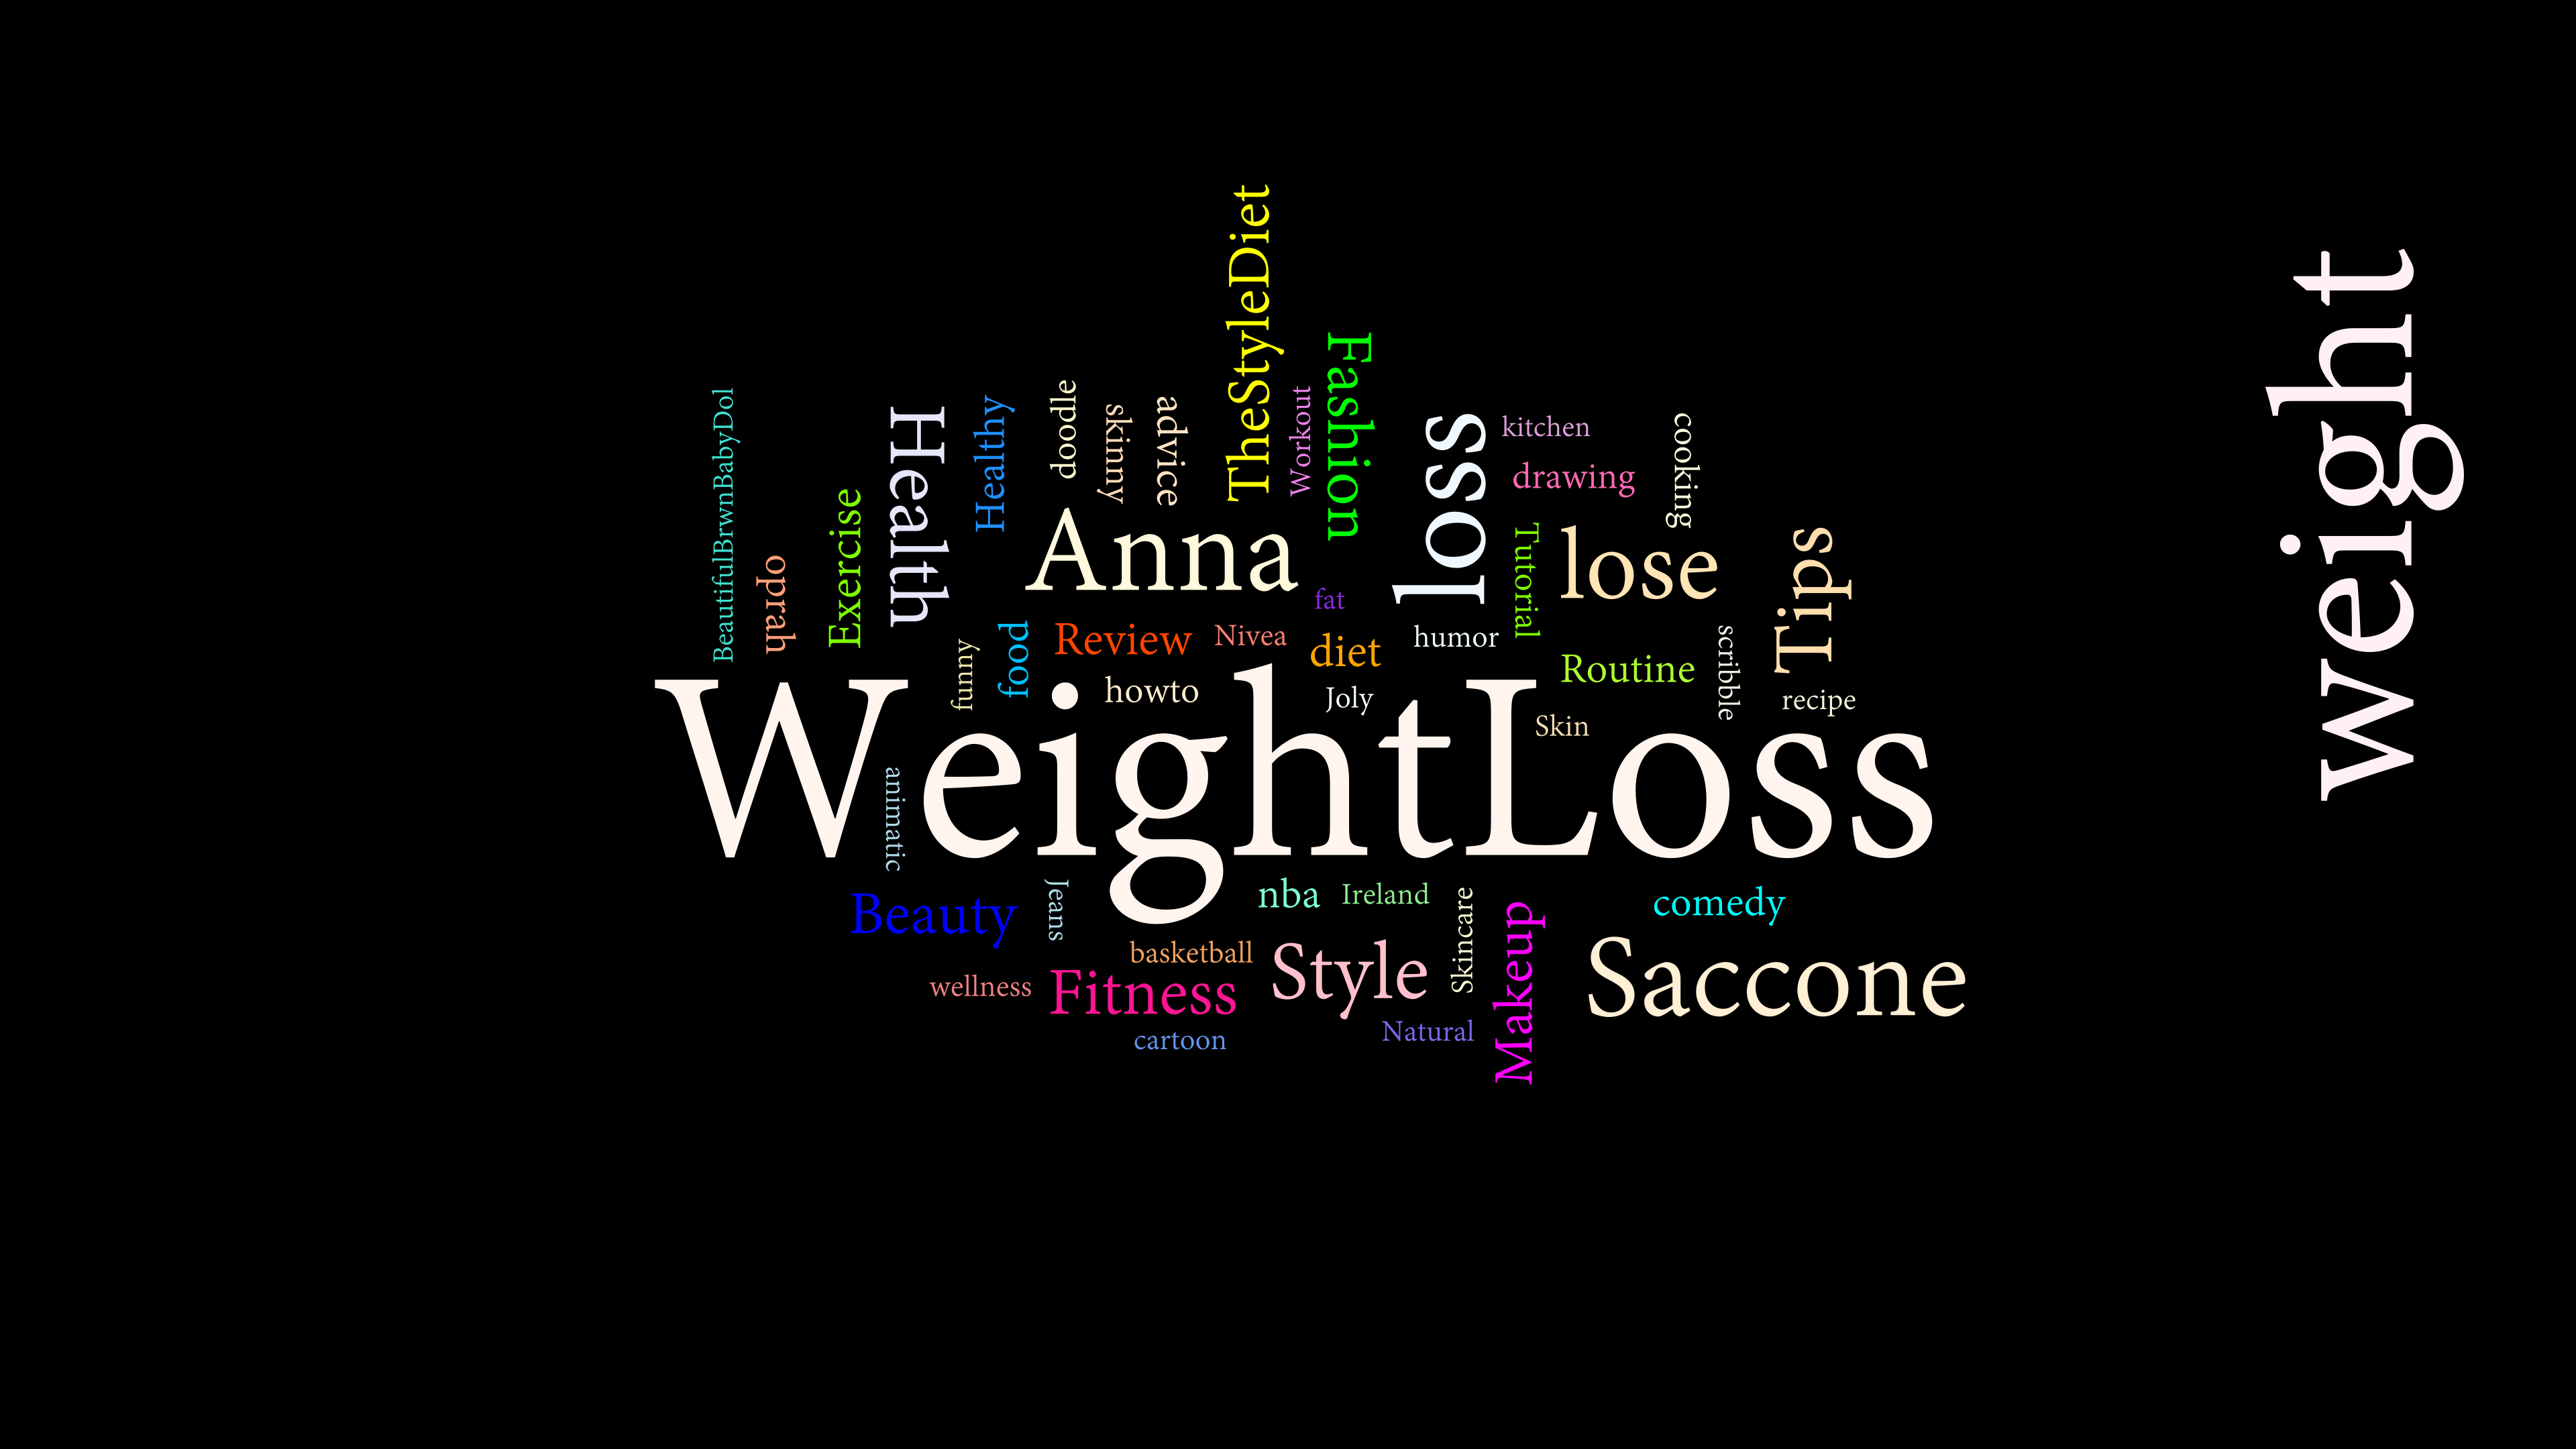 A word cloud of the most commong tags for Weight loss videos traversed with this tool, including 'theStyleDiet', 'Commedy' Beauty', and 'Anna Saccone', who seems to be a YouTuber popular in this area